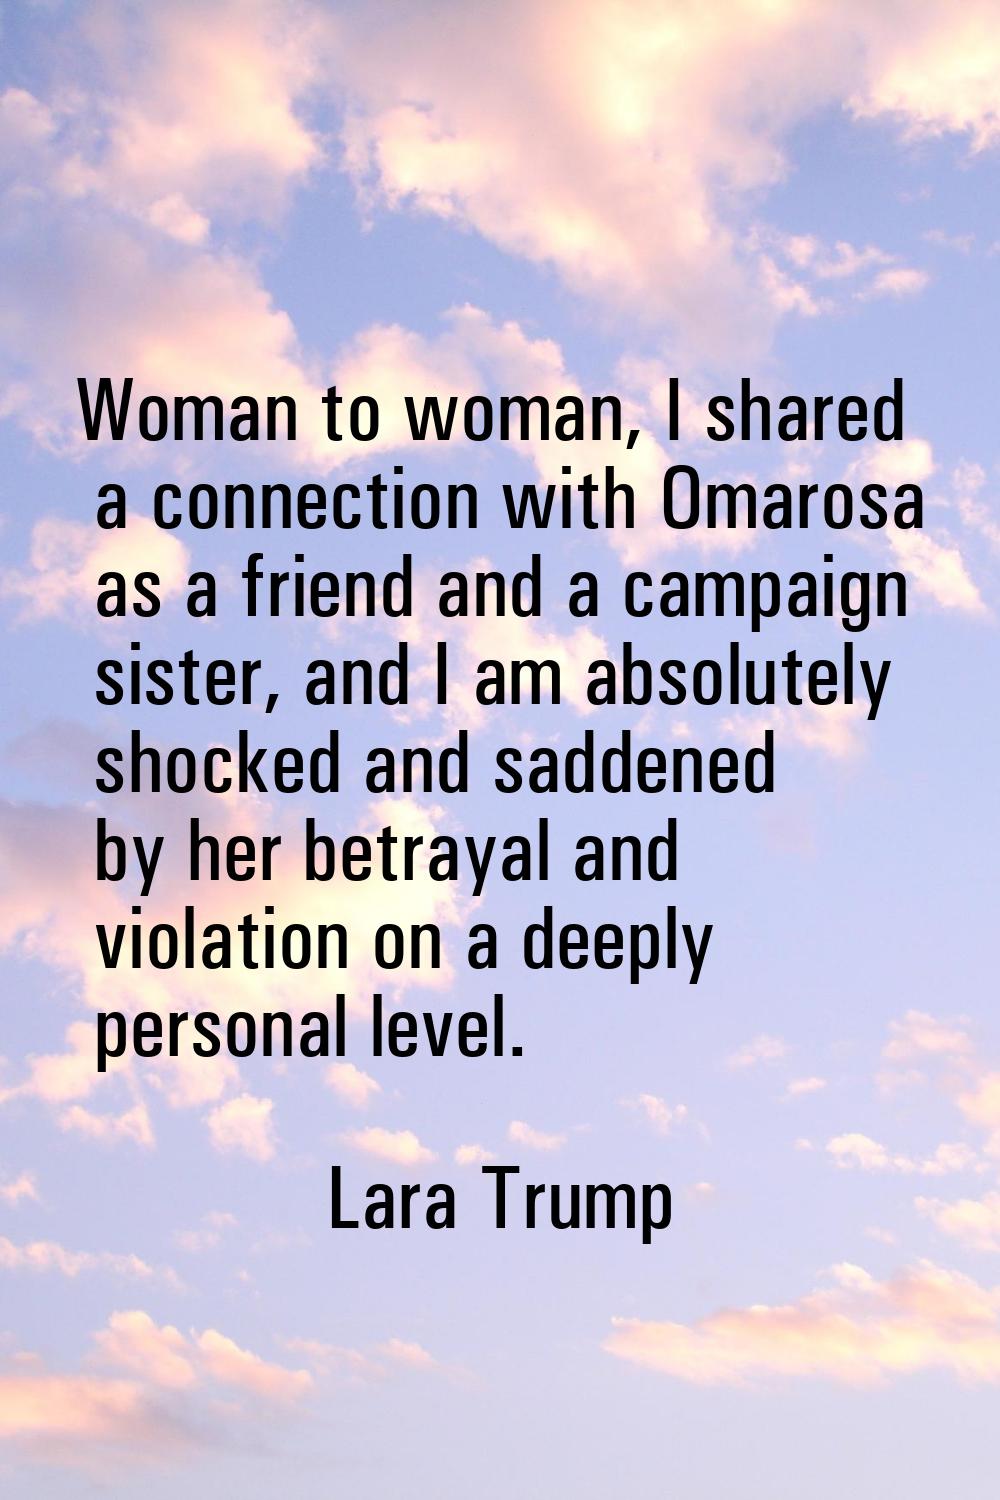 Woman to woman, I shared a connection with Omarosa as a friend and a campaign sister, and I am abso